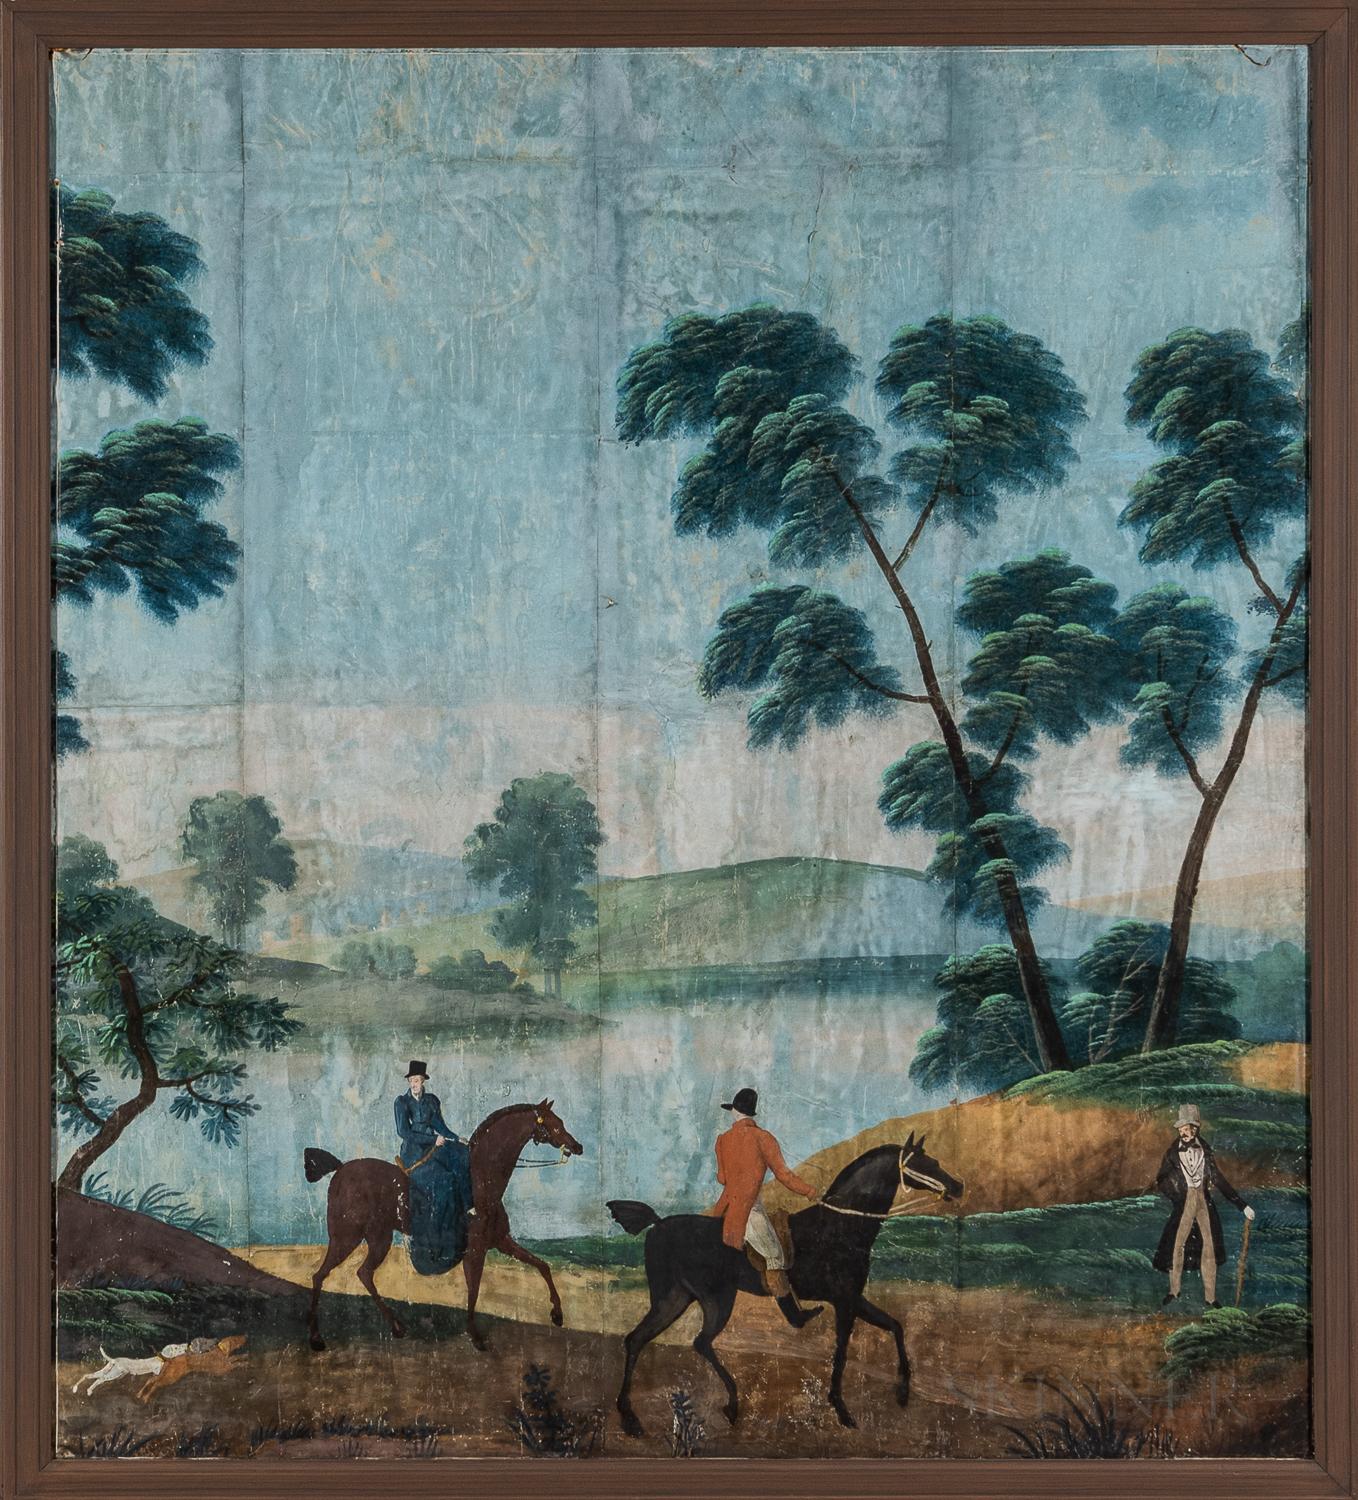 Five framed French Papier Peint wallpaper murals, early 19th century, figural country landscapes with riders on horseback, neoclassical hand-painted

Sight sizes 75 x 135 3/4, 75 x 67 1/4, 74 1/2 x 44 1/2, 74 1/2 x 24, 74 1/2 x 21 3/4.